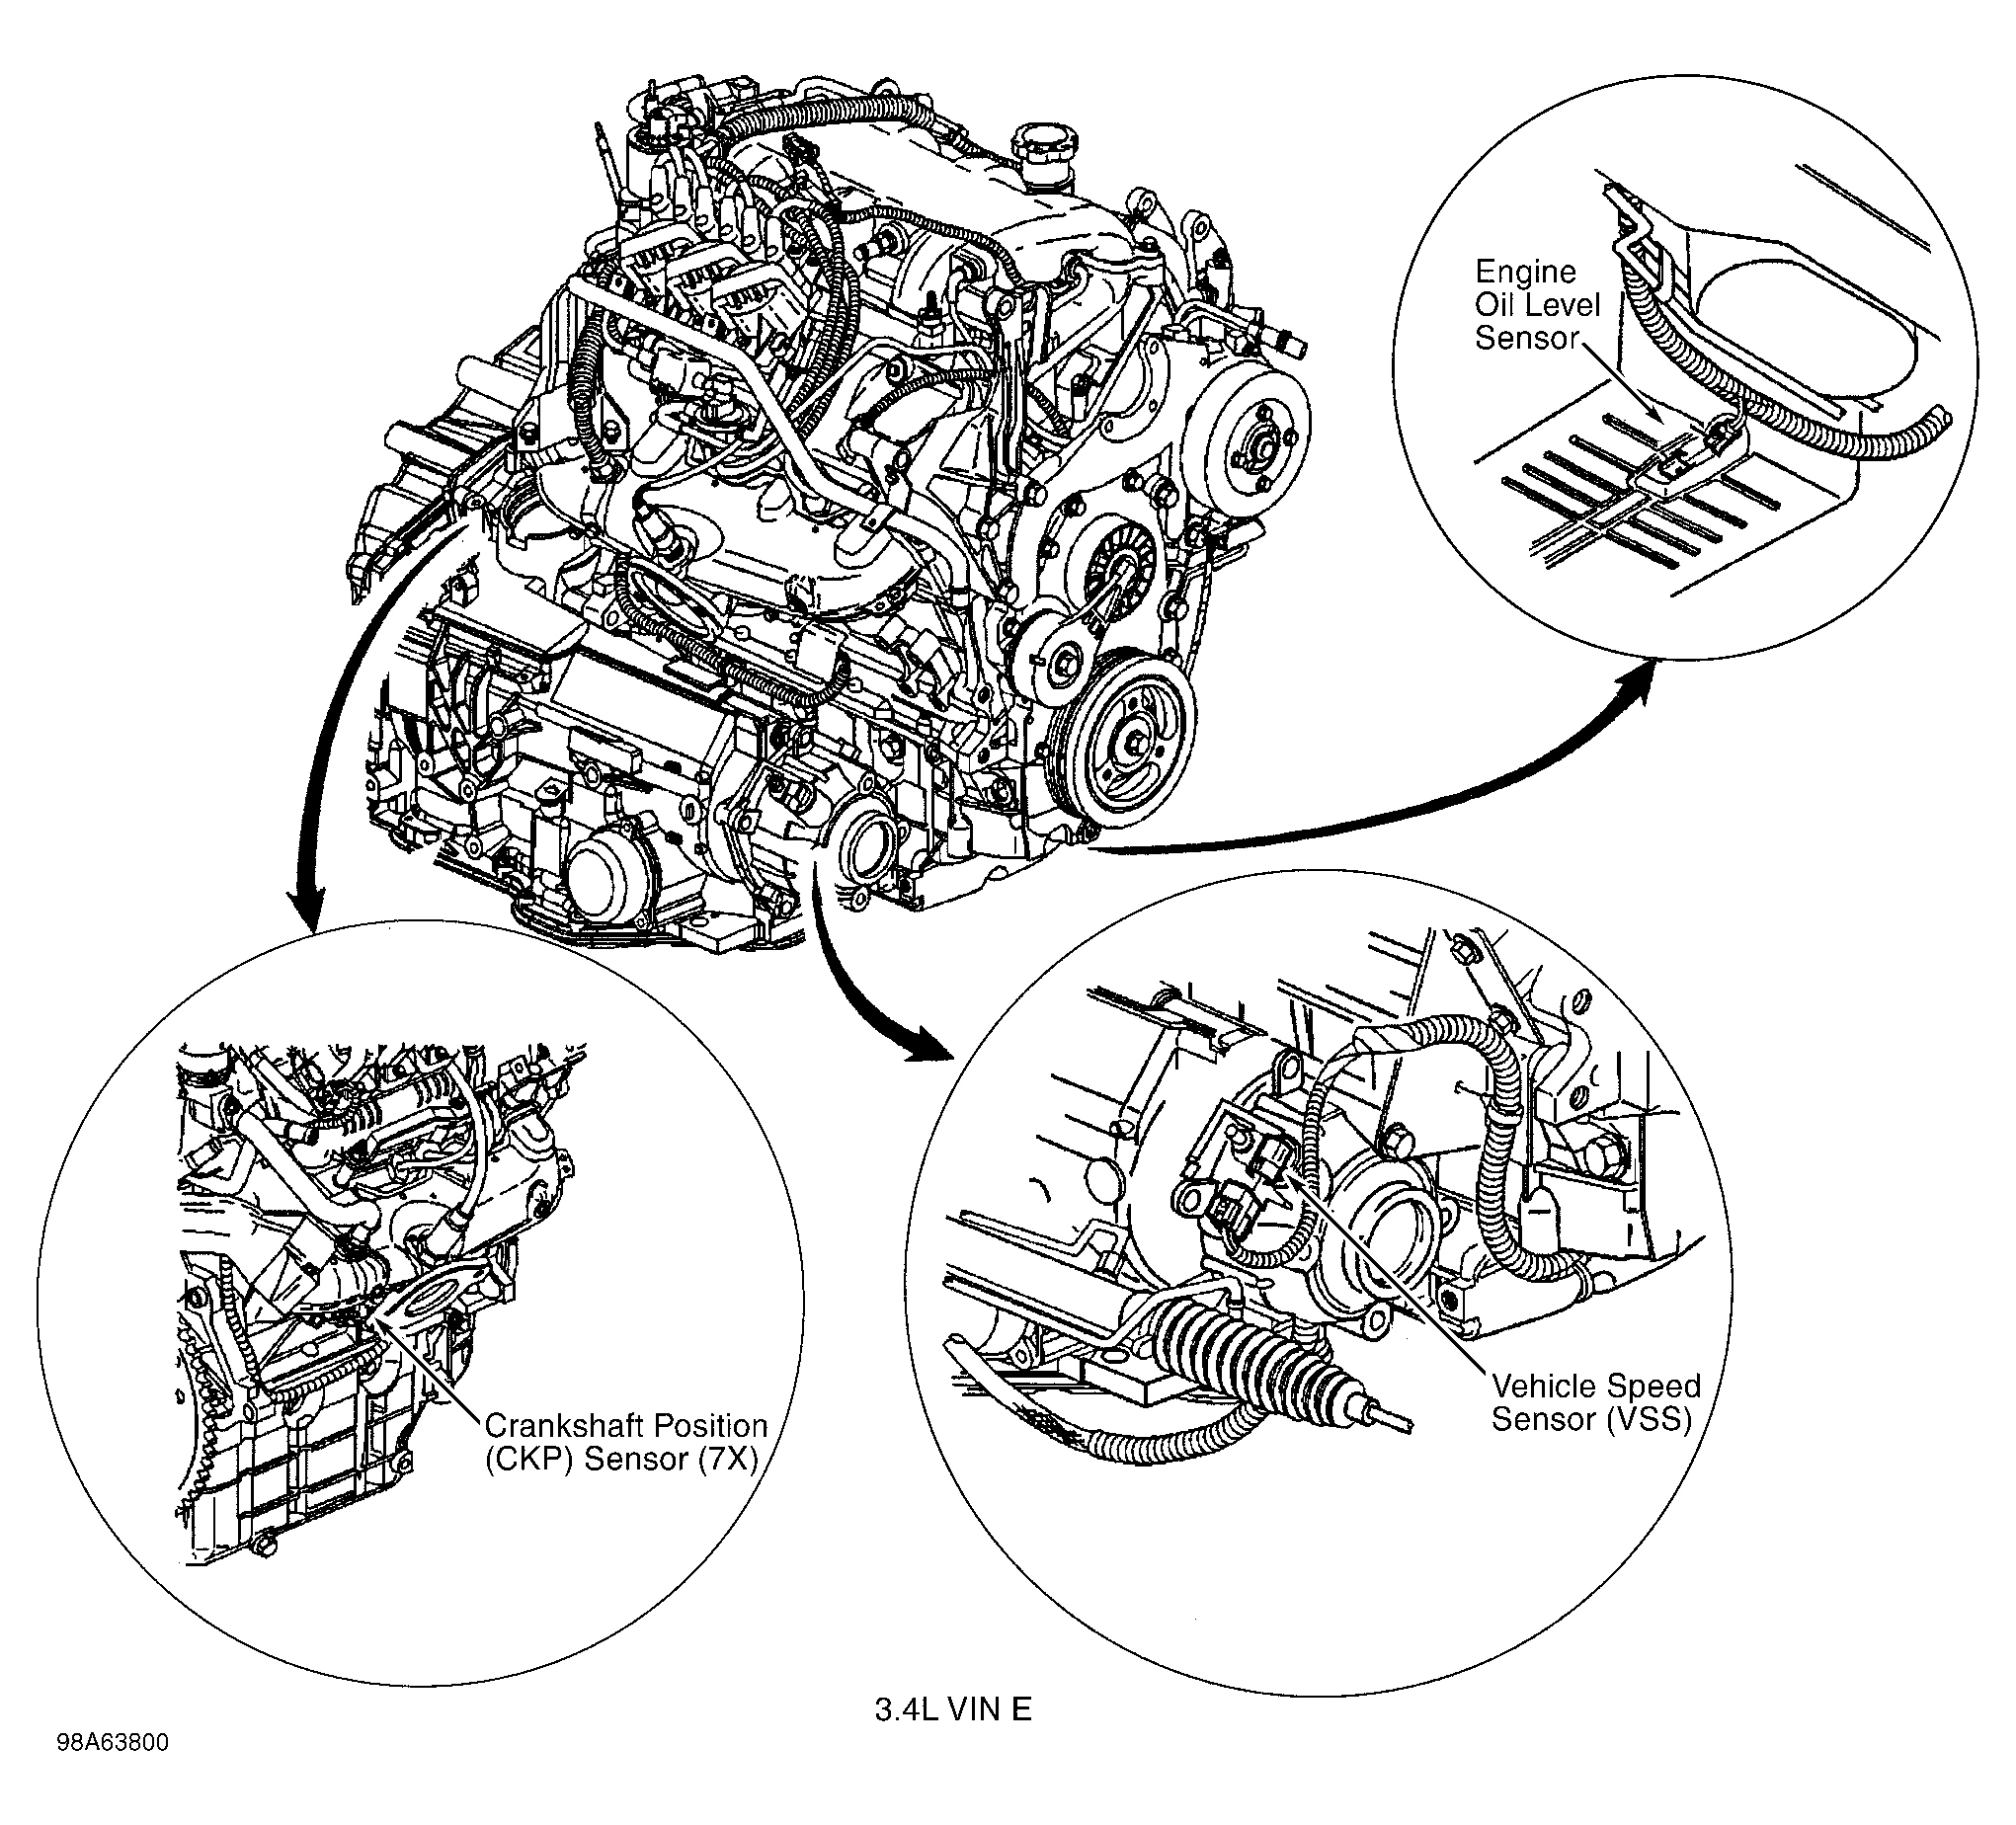 Chevrolet Impala 2001 - Component Locations -  Right Side Of Engine (3.4L VIN E)